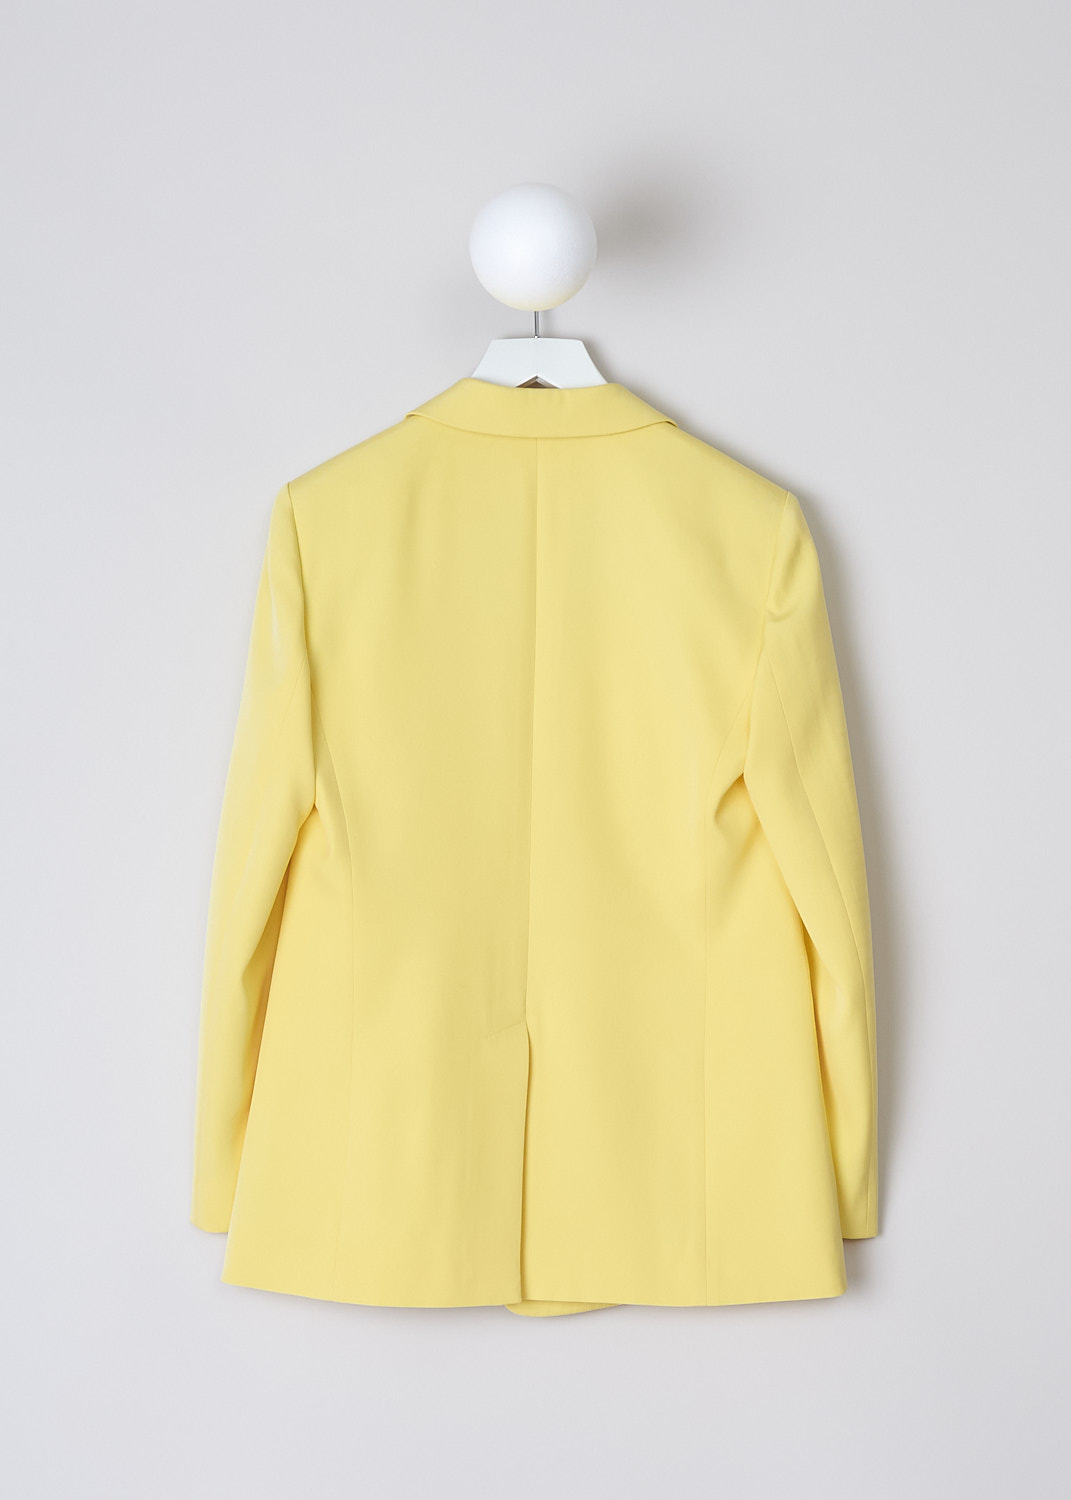 CHLOÉ, OPEN JACKET IN RADIANT YELLOW, CHC22UVE06015757_RADIANT_YELLOW, Yellow, Back, This Radiant Yellow jacket has a peaked lapel with an open front. On the front, the jacket has two flap welt pockets. In the back, the jacket has a centre vent. The jacket is fully lined and has an oversized silhouette. 
